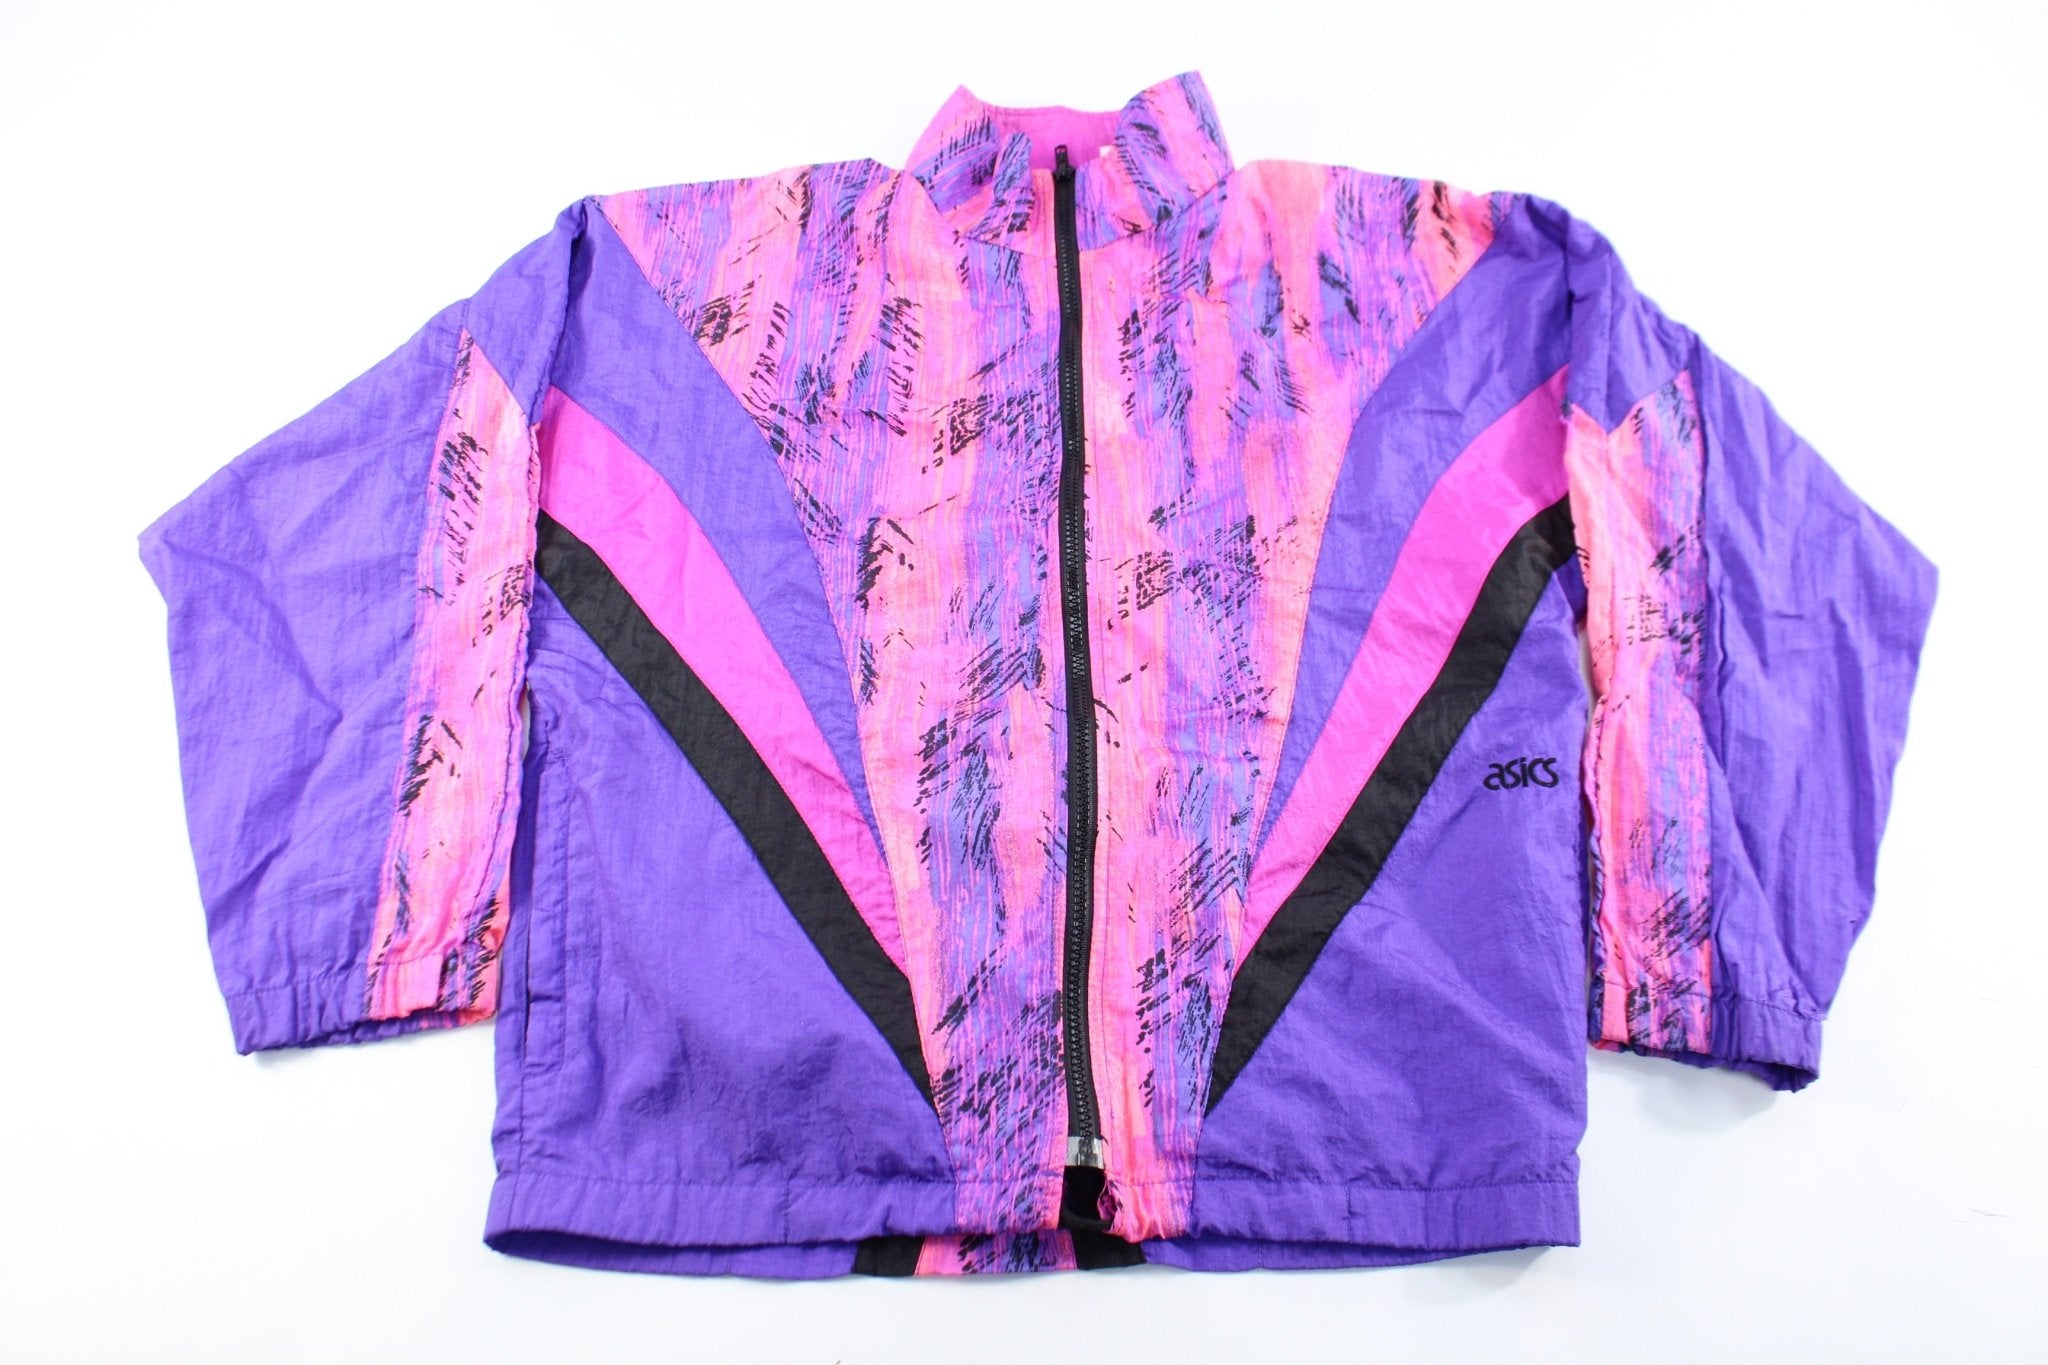 Asics Embroidered Logo Abstract Zip Up Jacket - ThriftedThreads.com